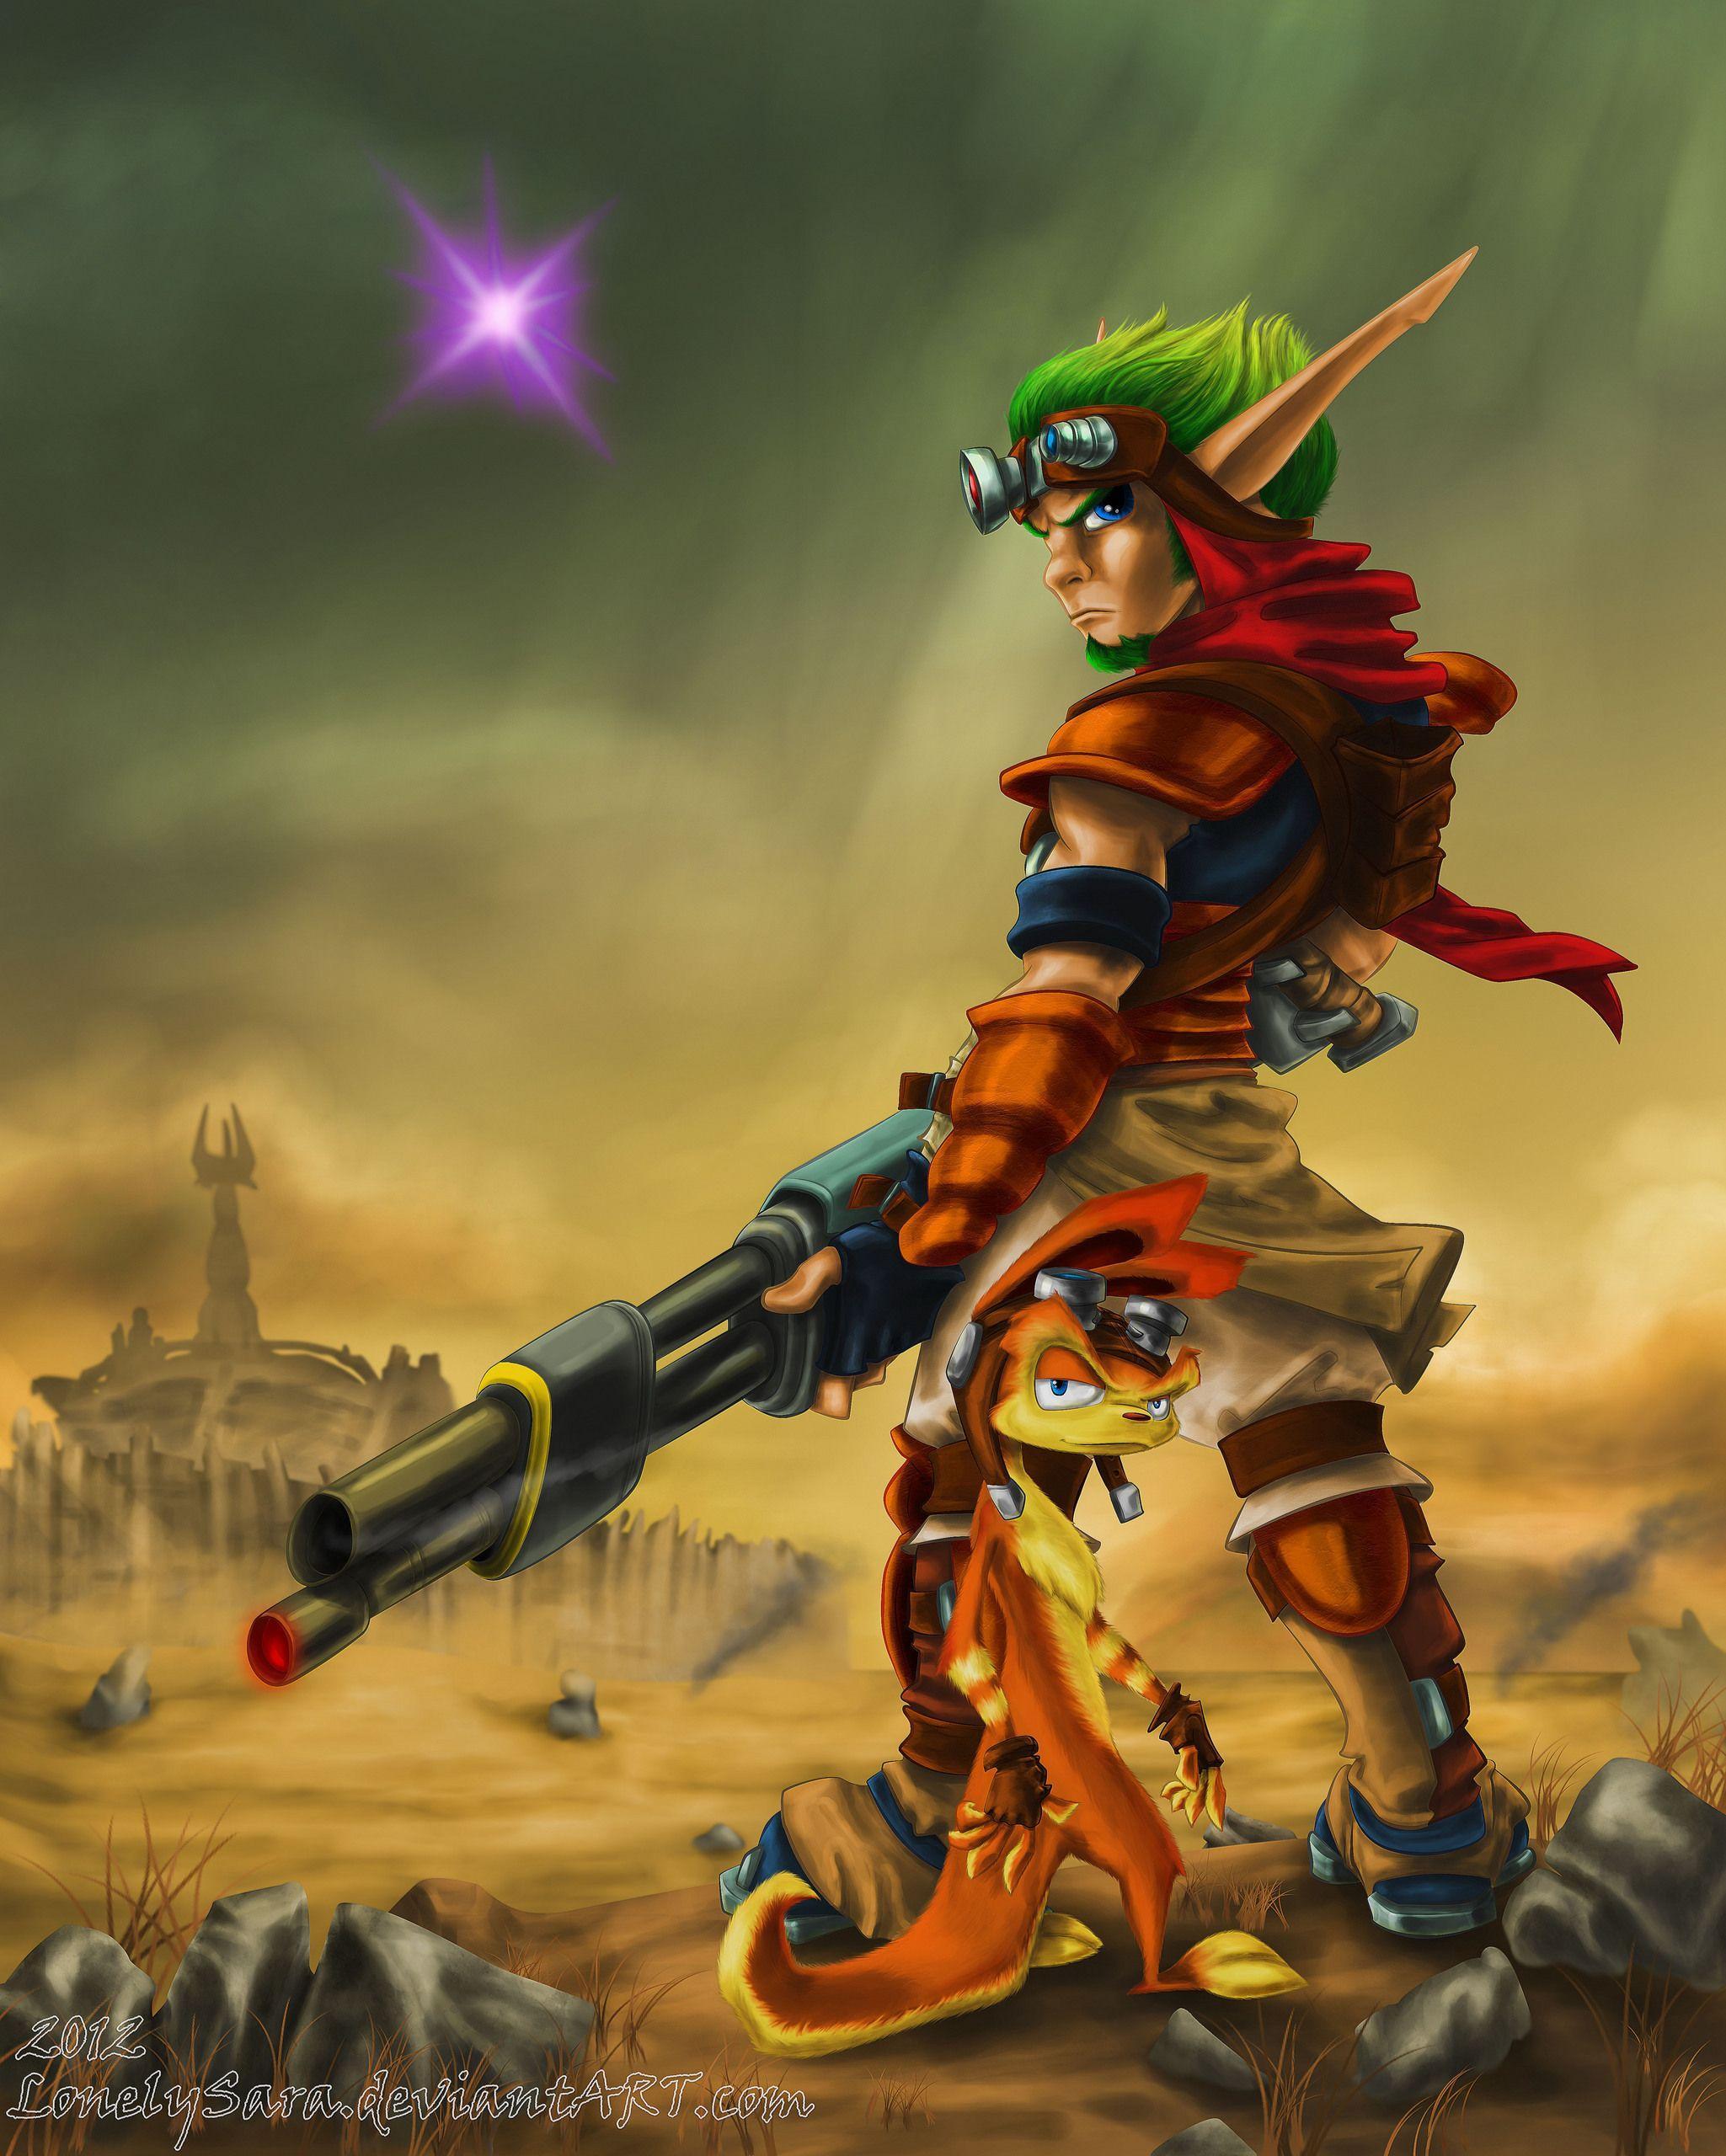 jak and daxter pc download